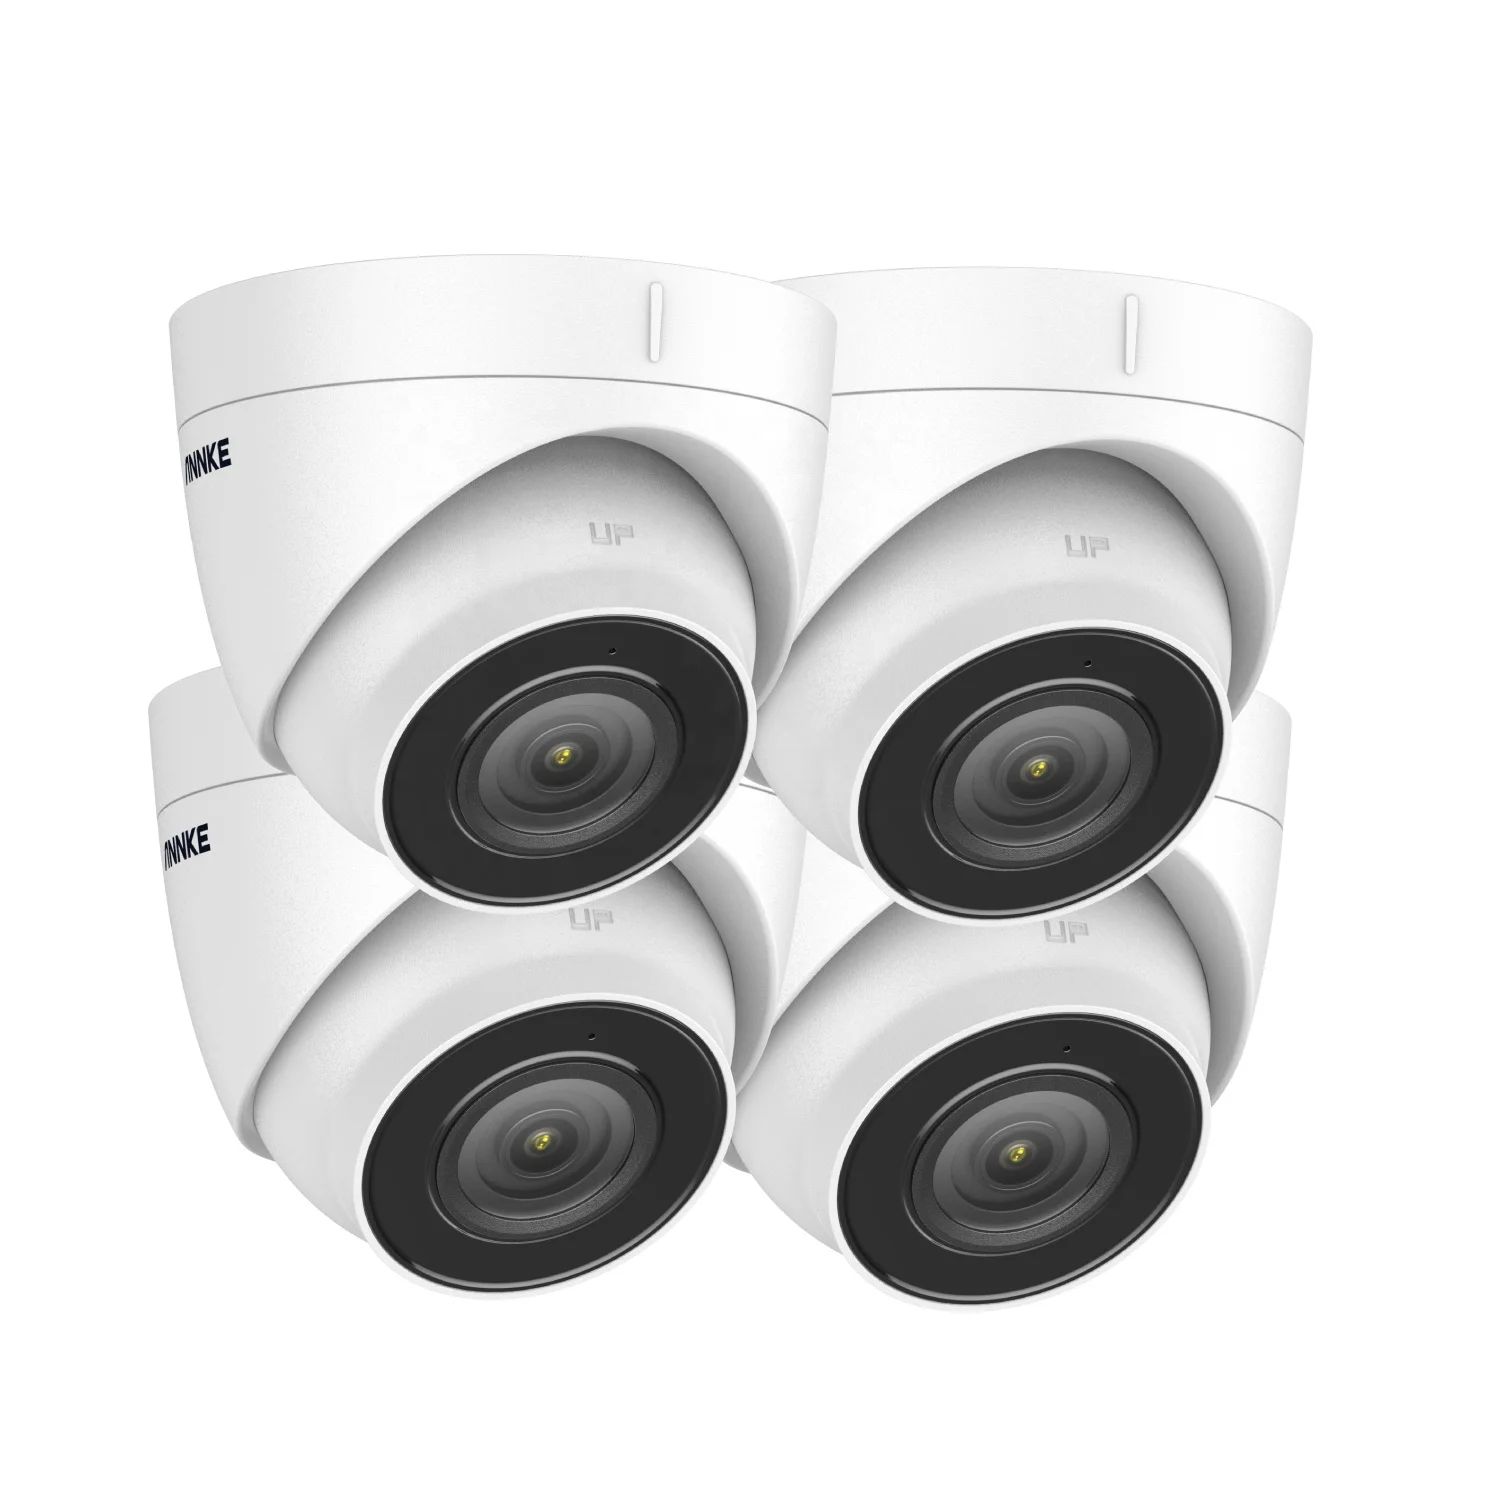 

ANNKE 5MP POE IP Turret Camera 4pcs Set Security Camera Outdoor IP Cameras with 2.8MM Lens 24/7 Audio Recording IP67 Rated